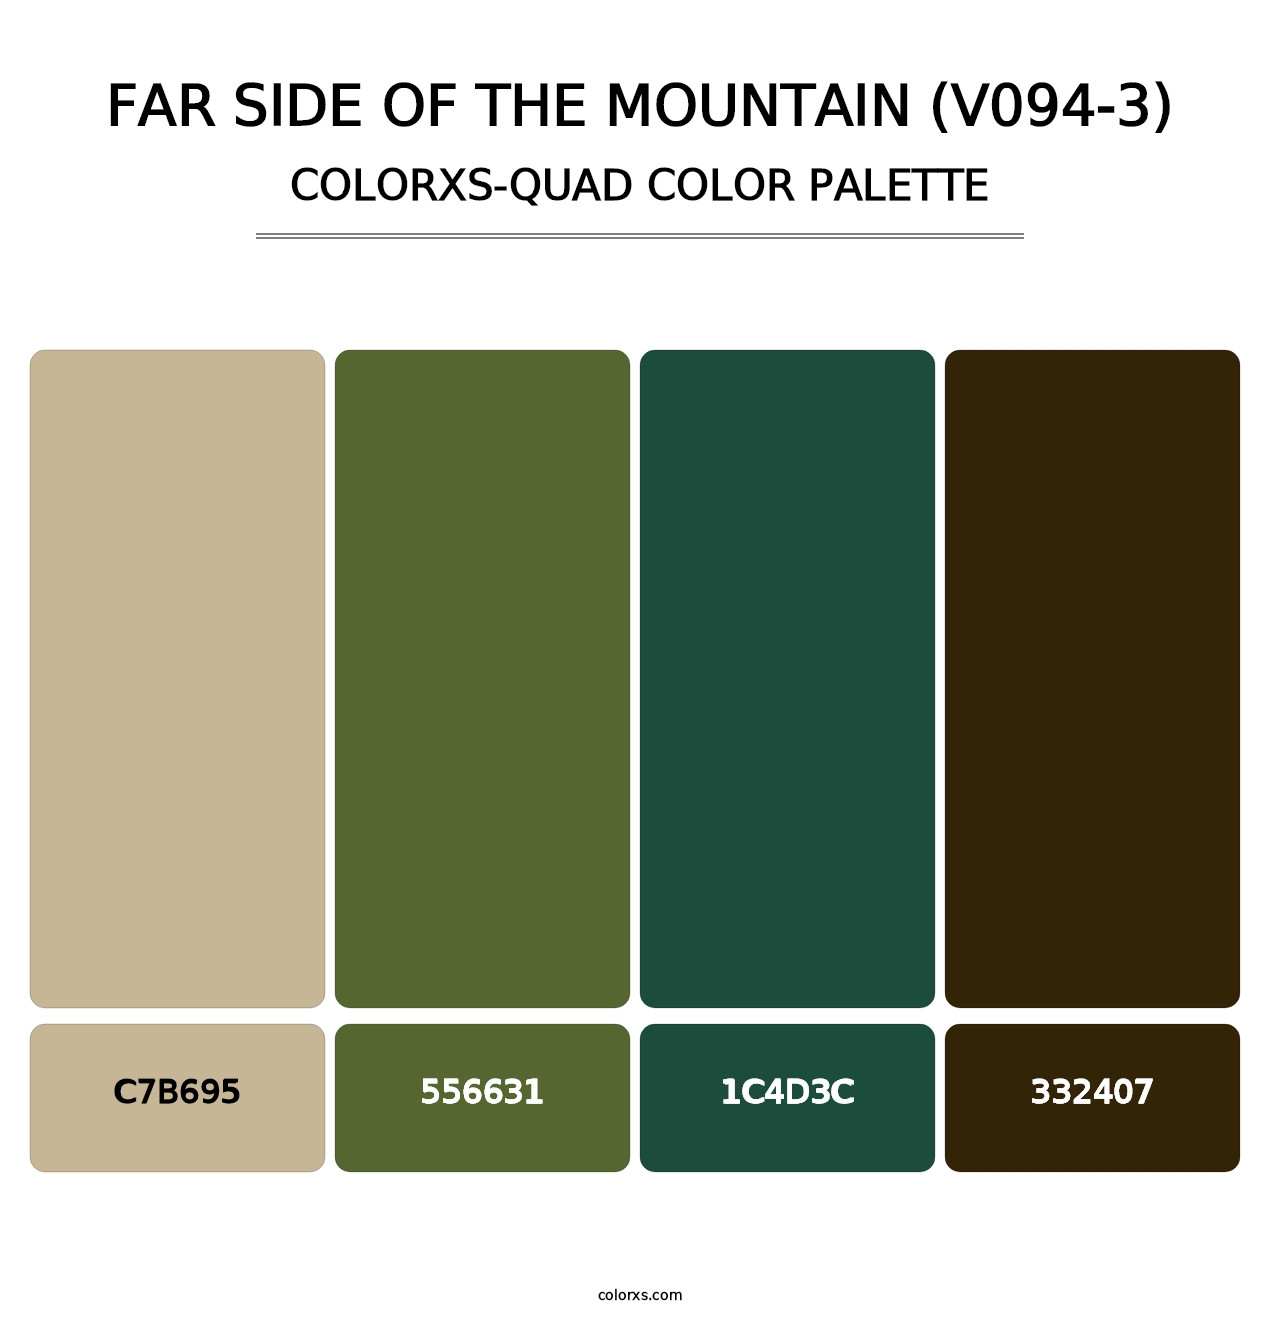 Far Side of the Mountain (V094-3) - Colorxs Quad Palette